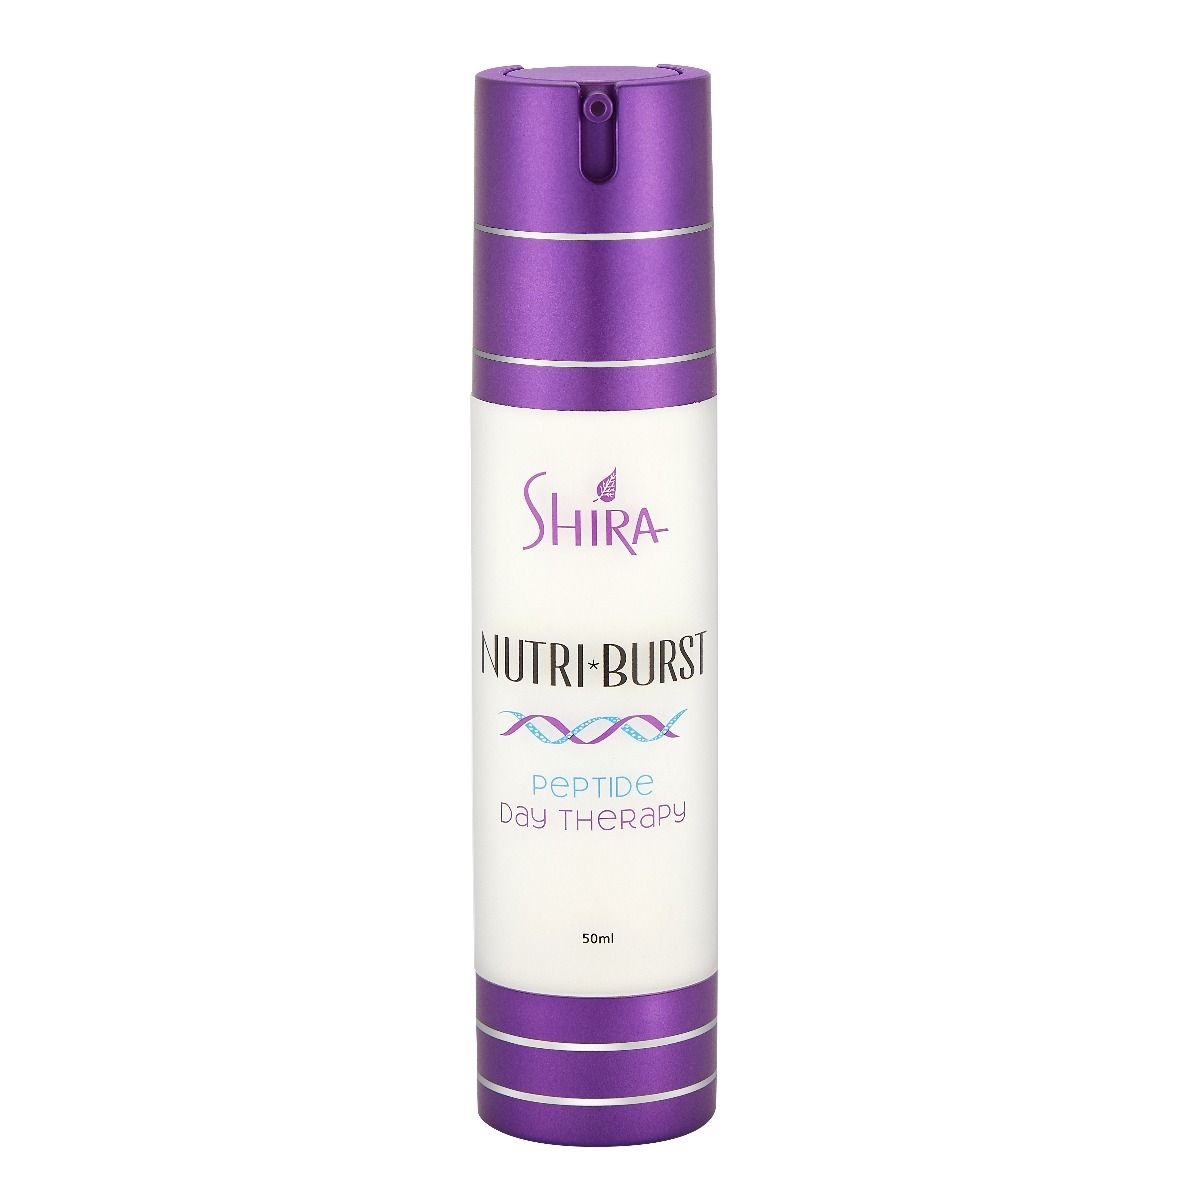 Shira Nutriburst Peptide Day Therapy